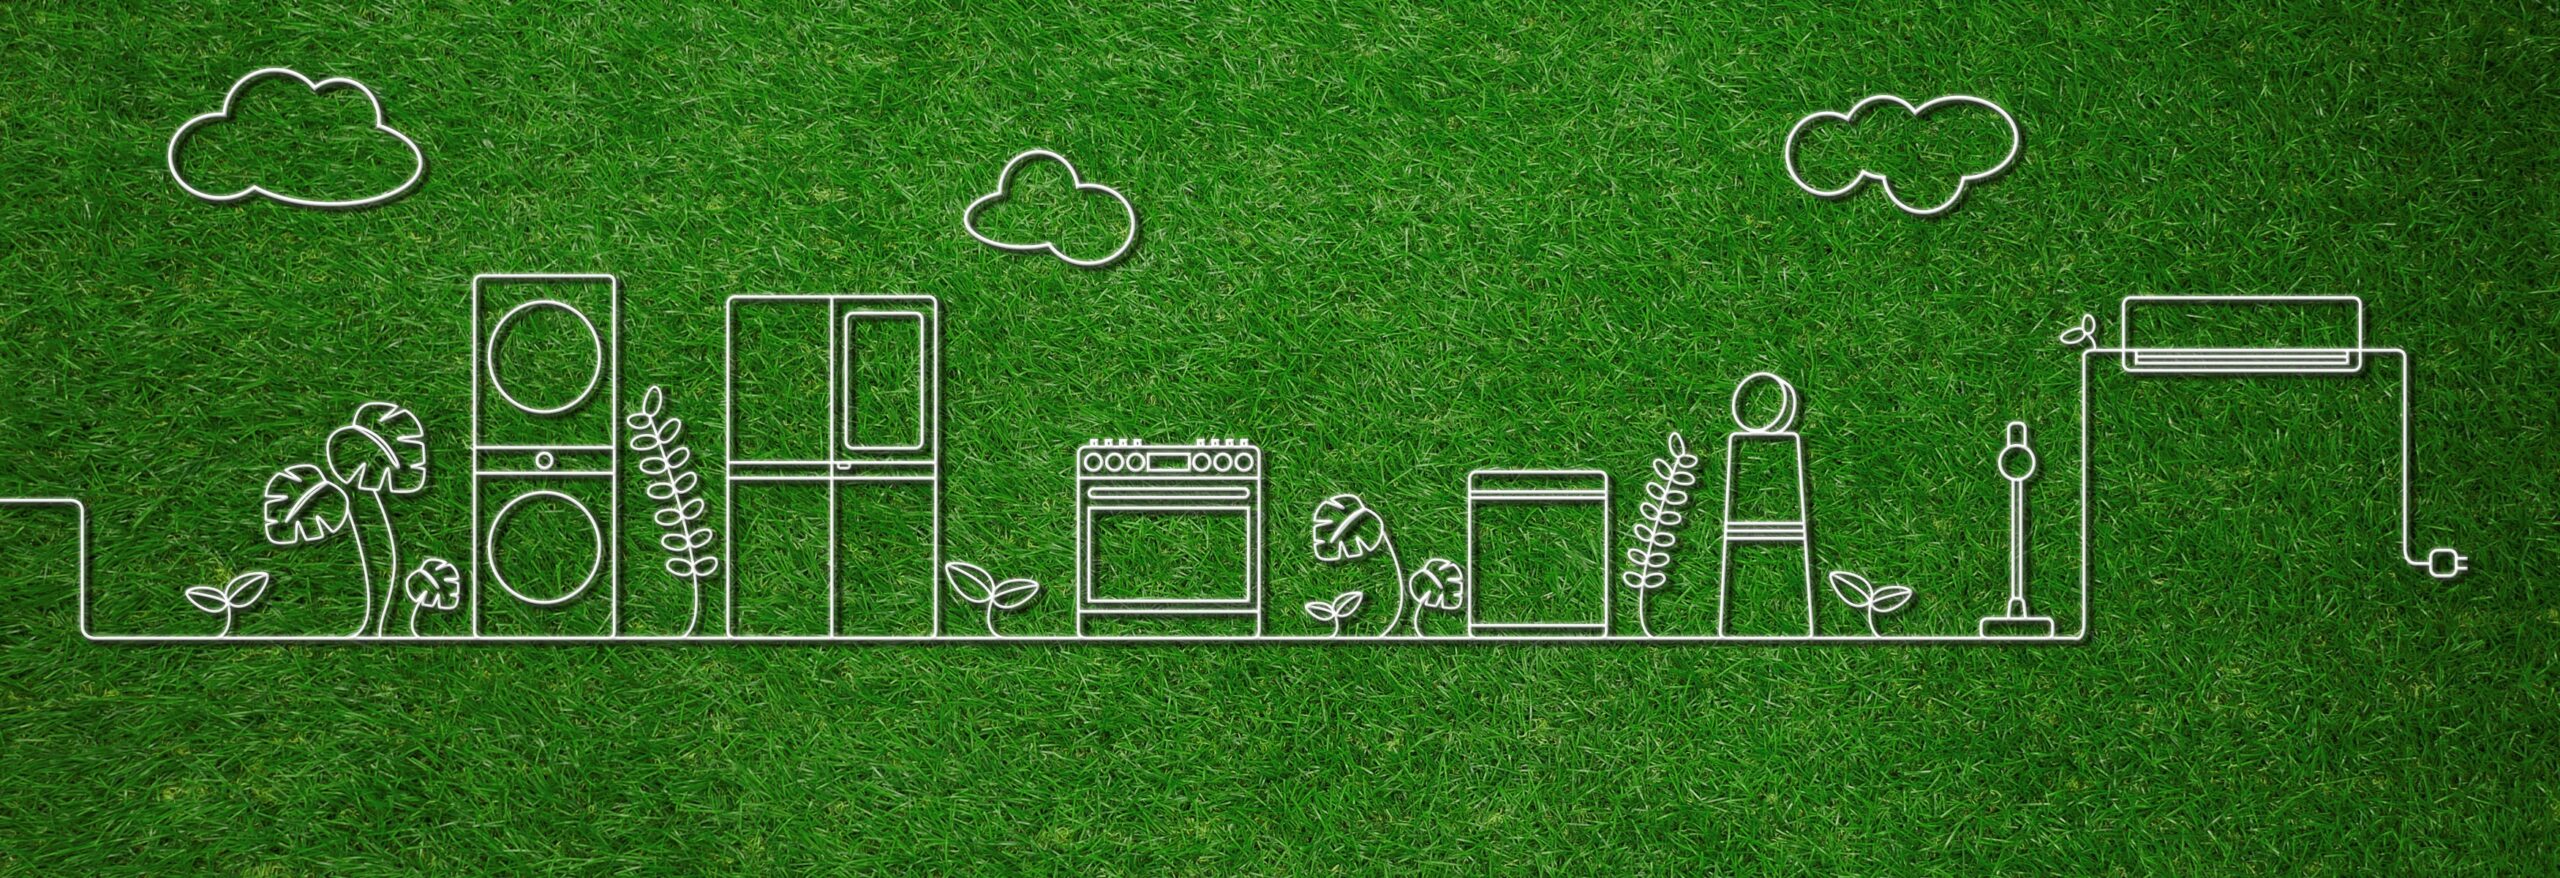 An illustration including LG's various home appliances